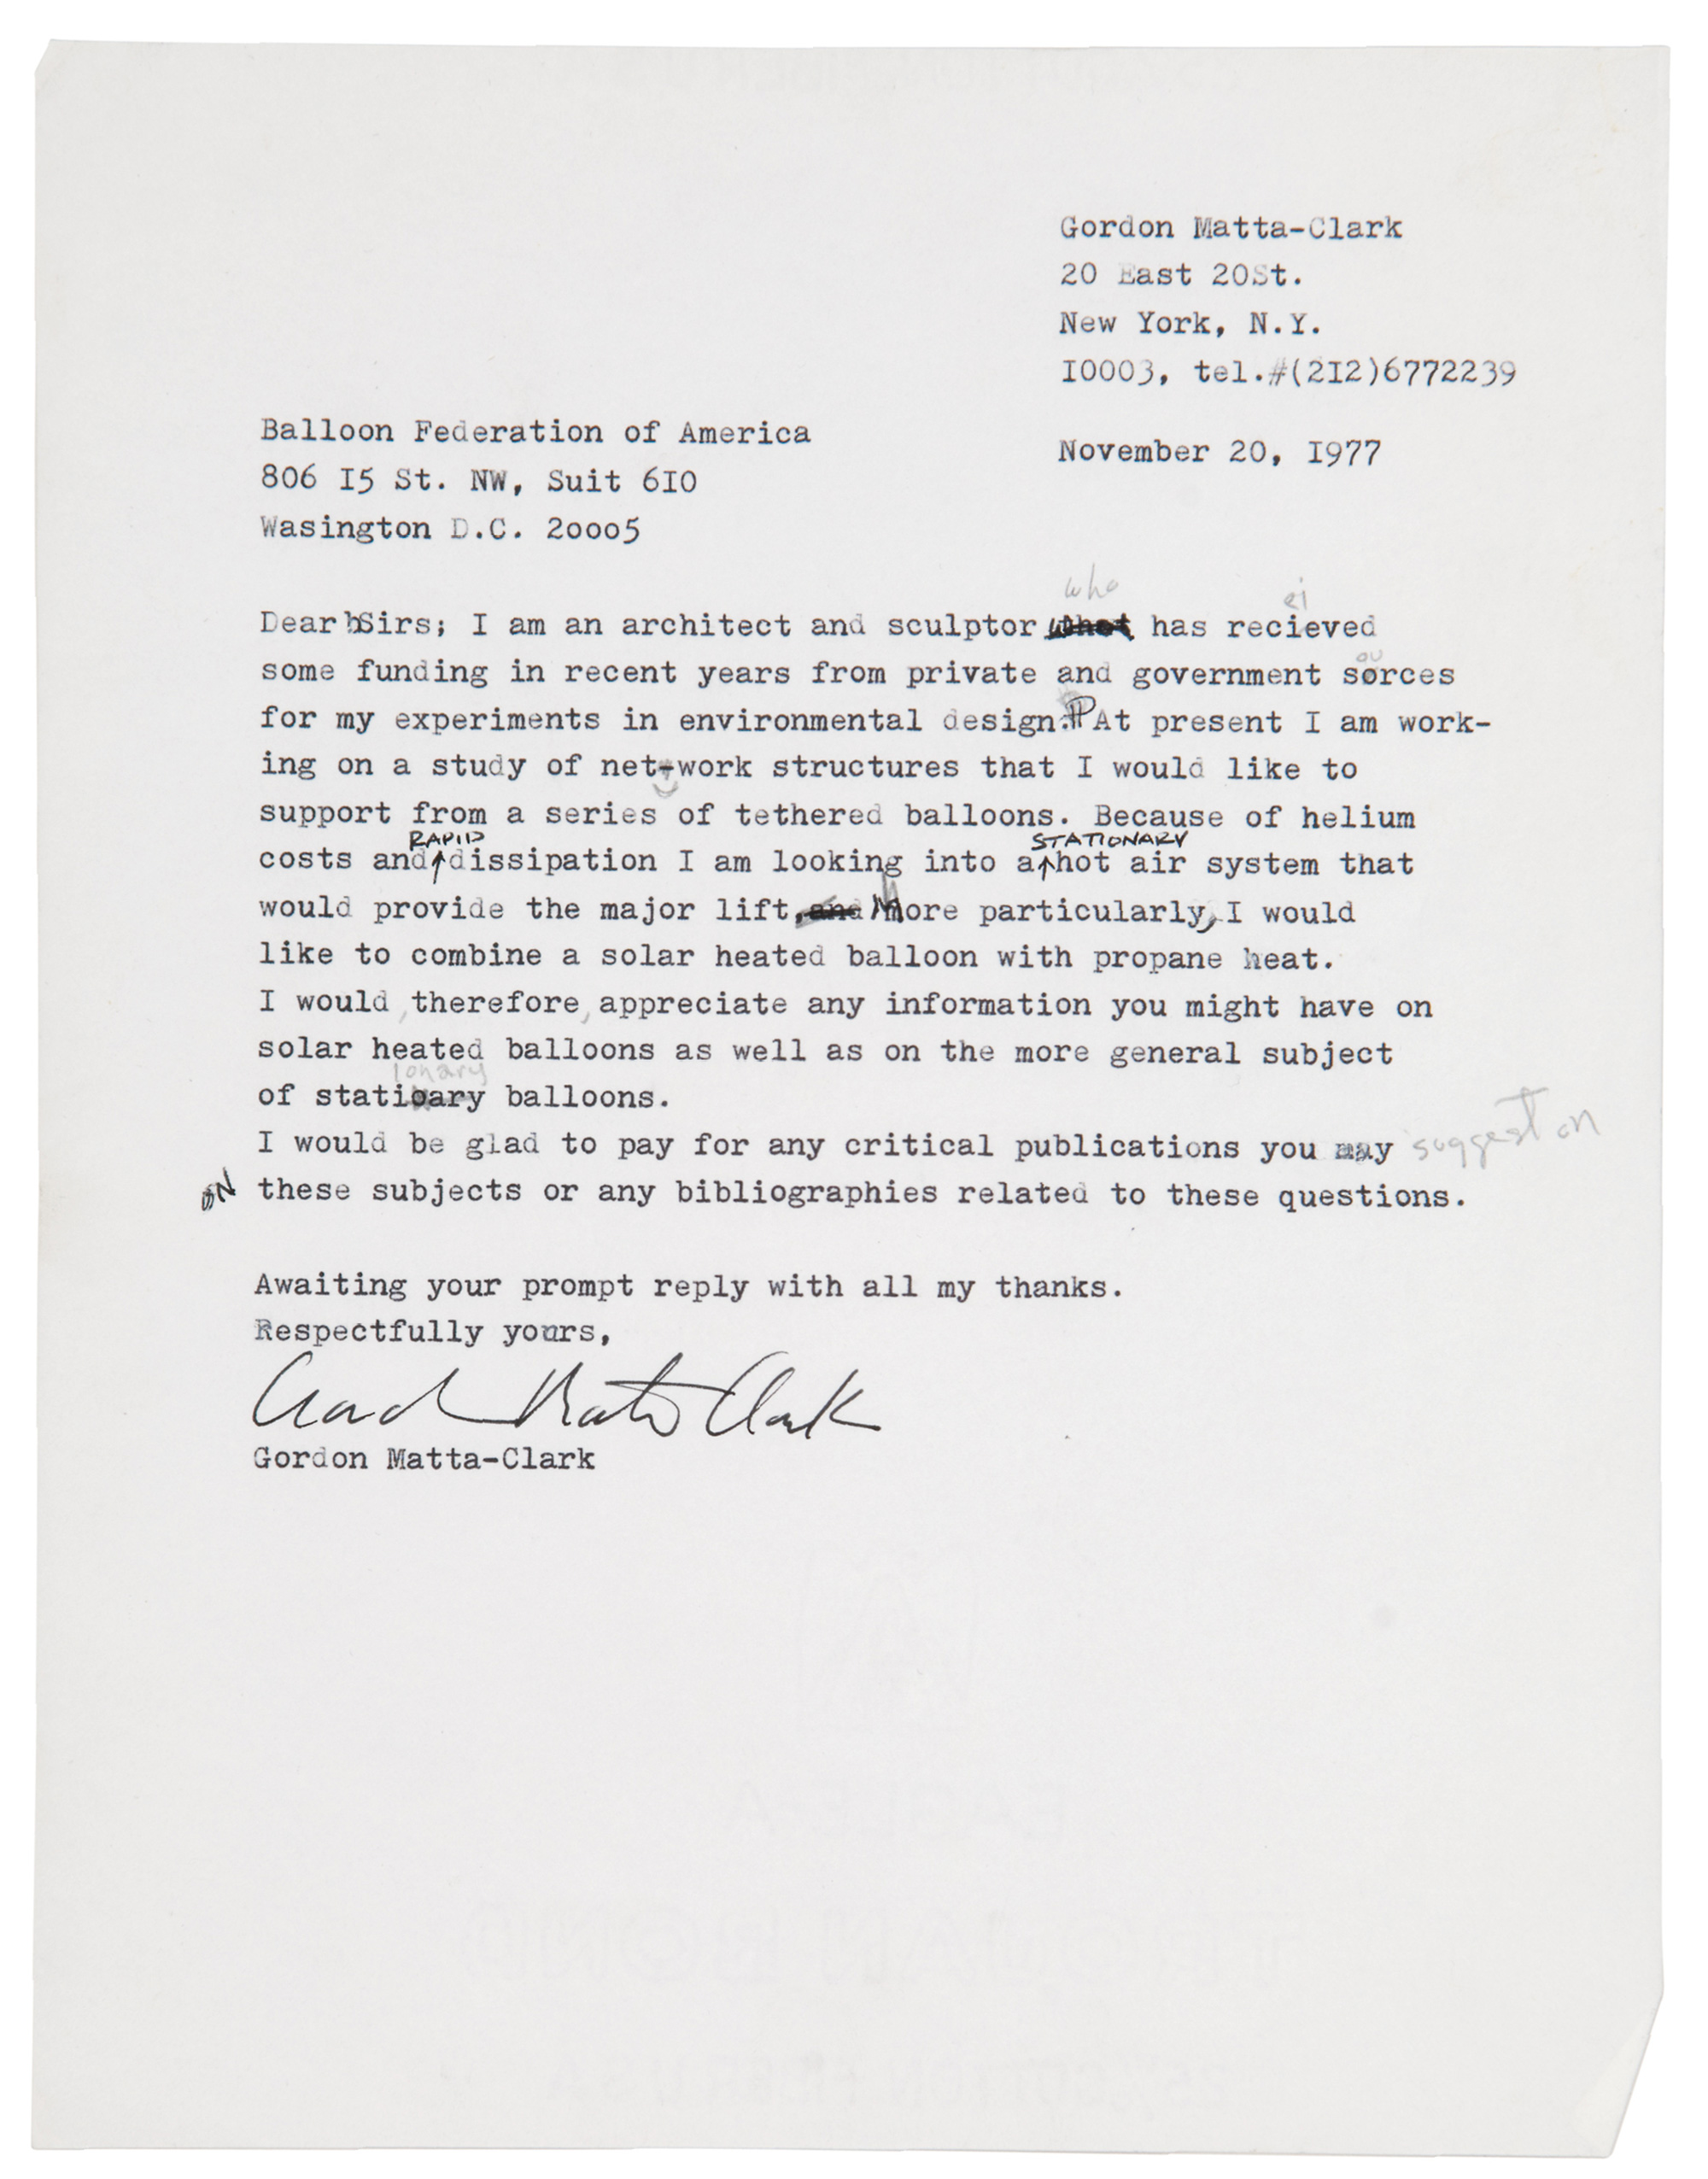 All correspondence reproduced here courtesy Estate of Gordon Matta-Clark, on deposit at the Canadian Centre for Architecture, Montreal.